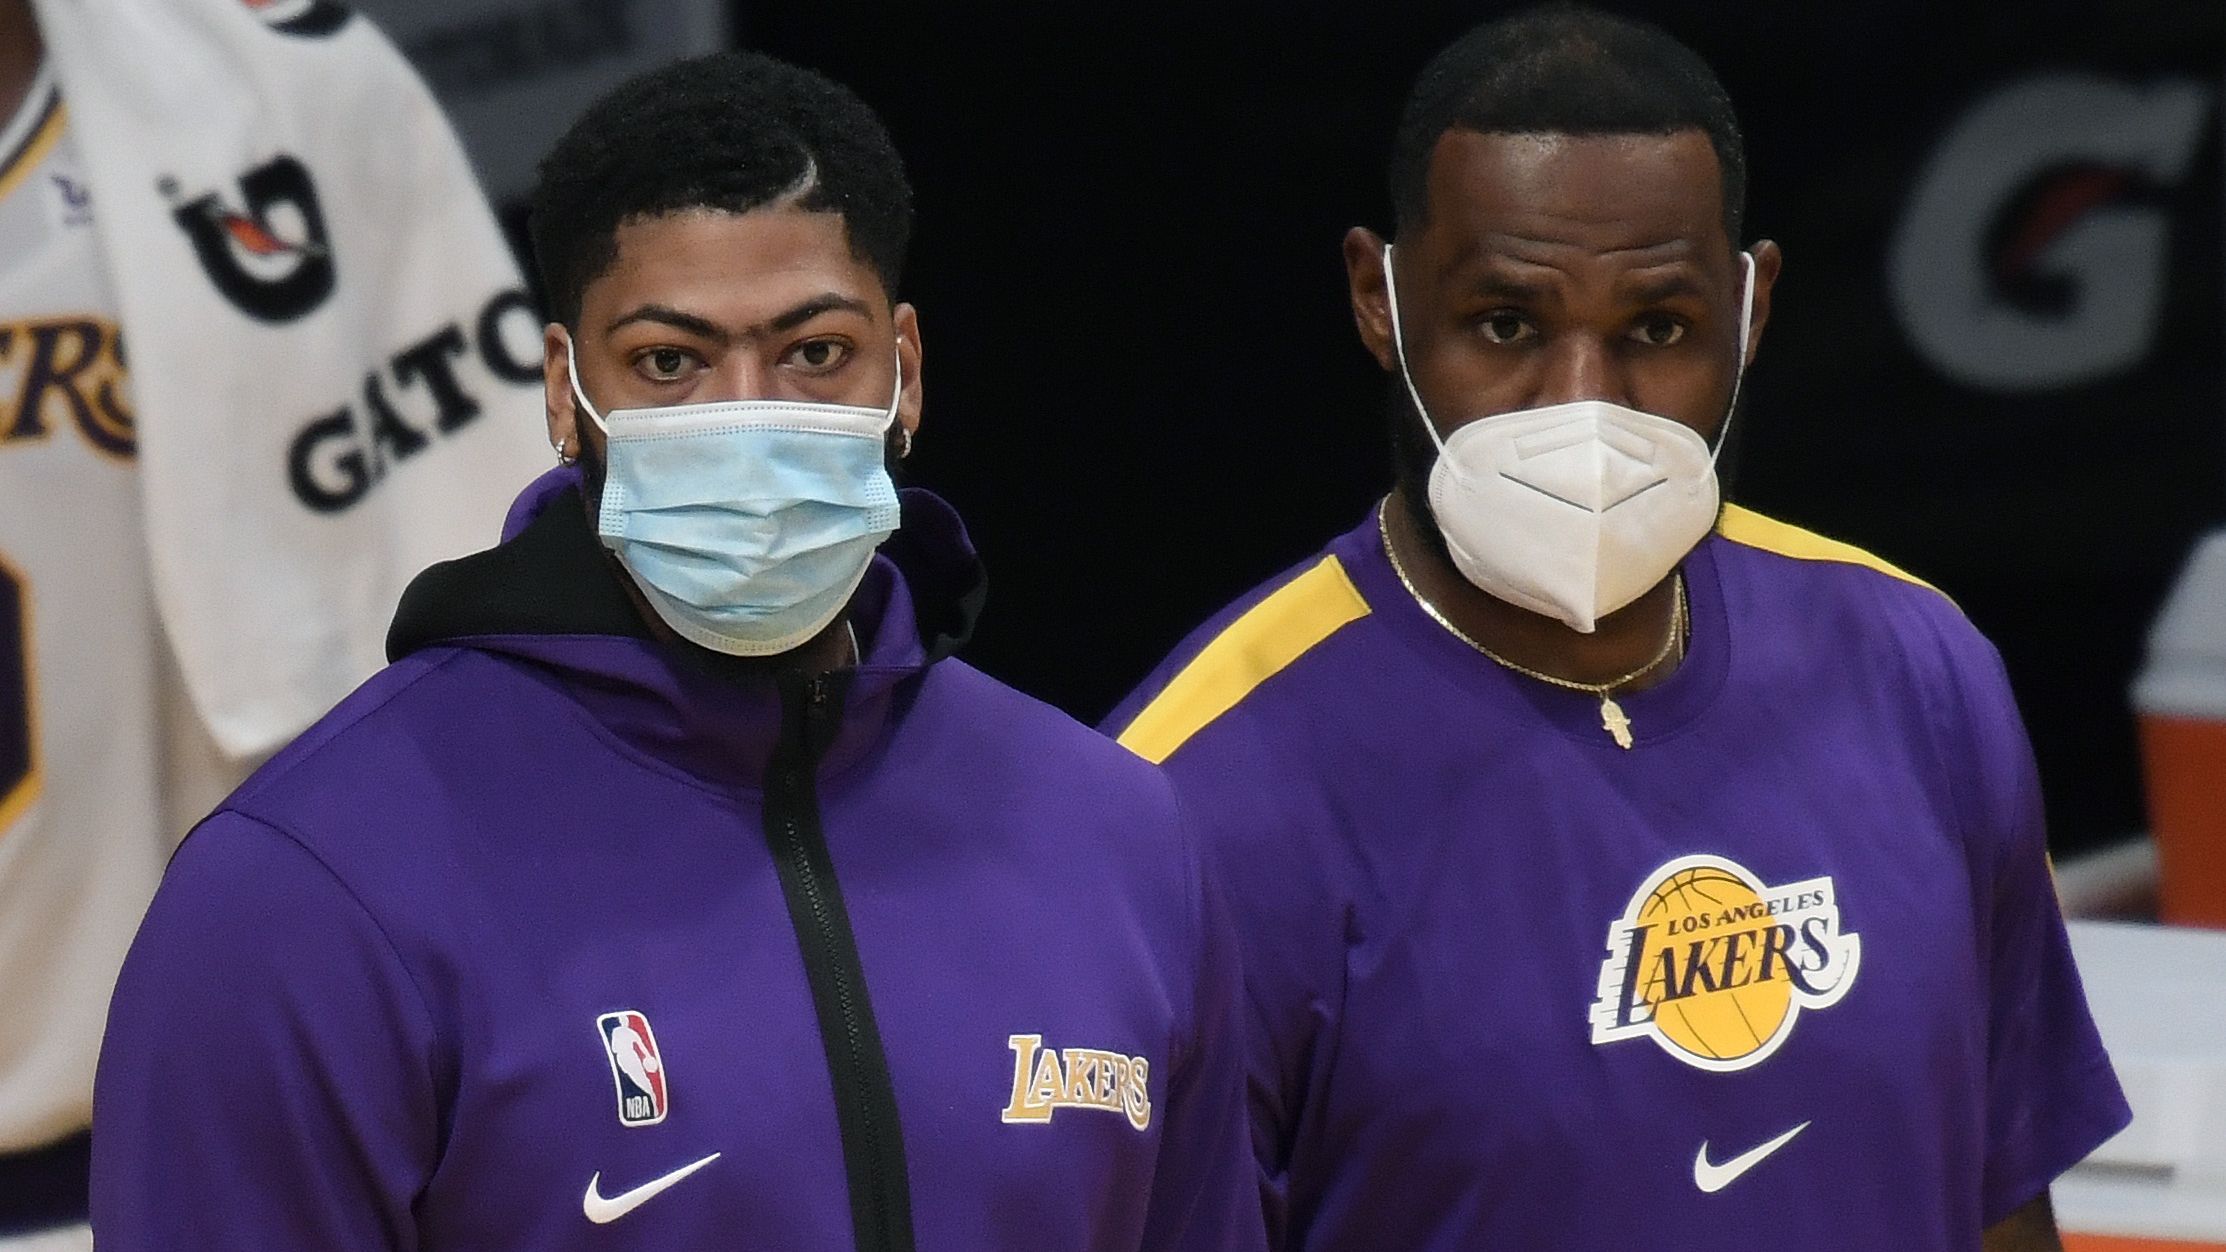 Anthony Davis and LeBron James of the Los Angeles Lakers watch a preseason game.